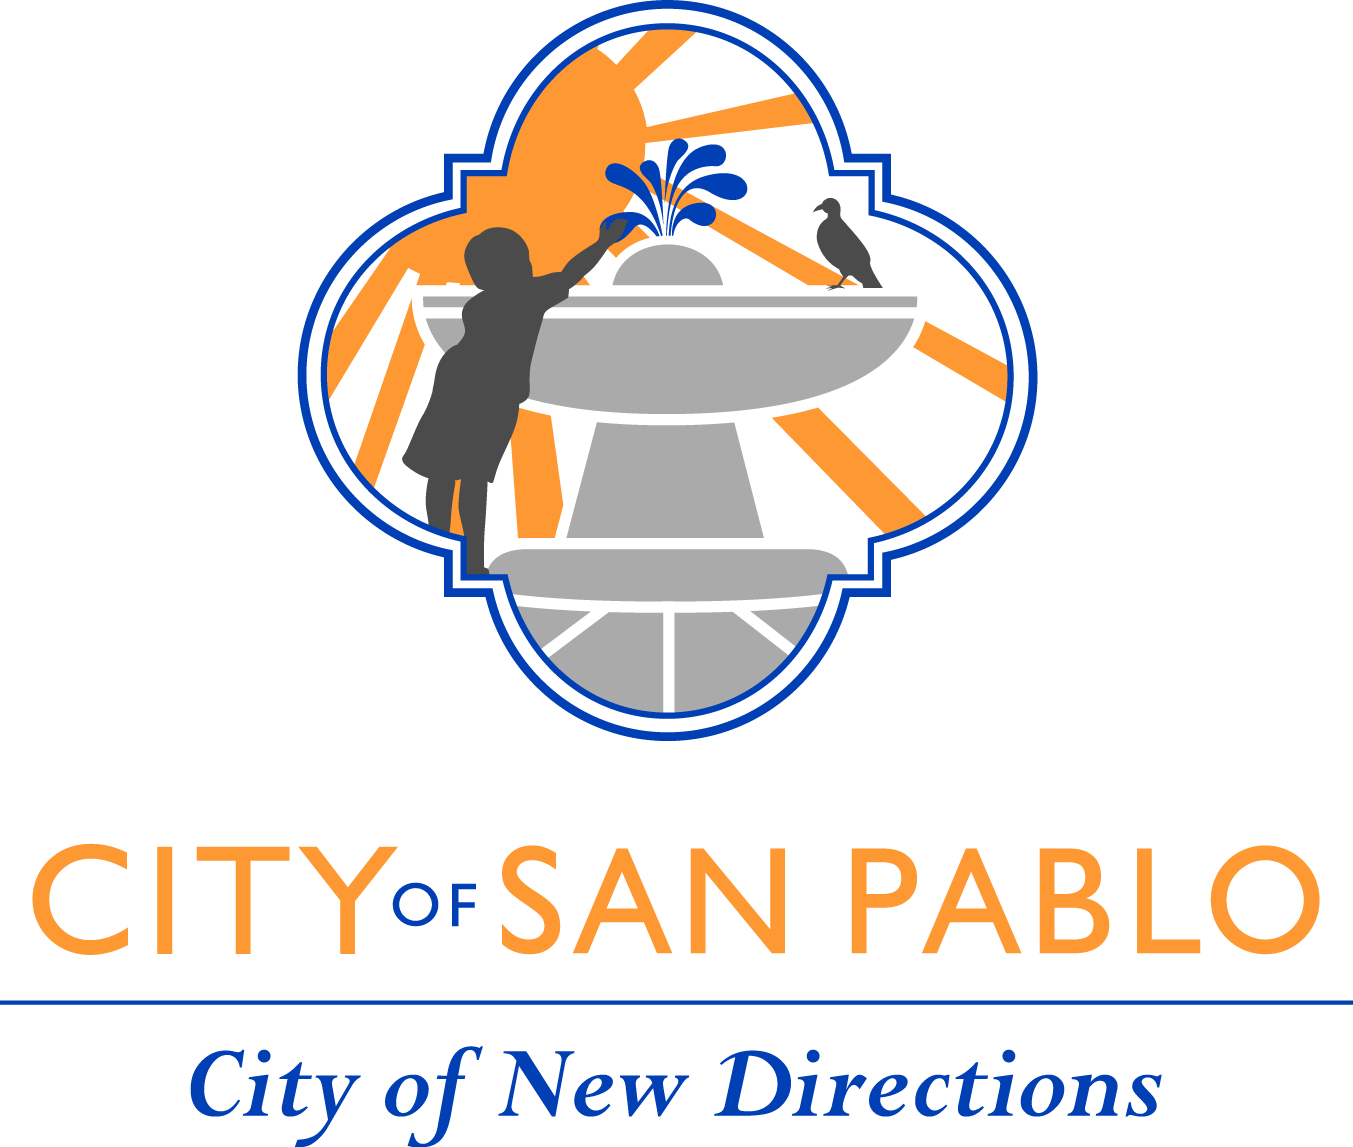 City of San Pablo logo, says City of San Pablo, City of New Direction, shows illustration of child, bird, sun, water fountain